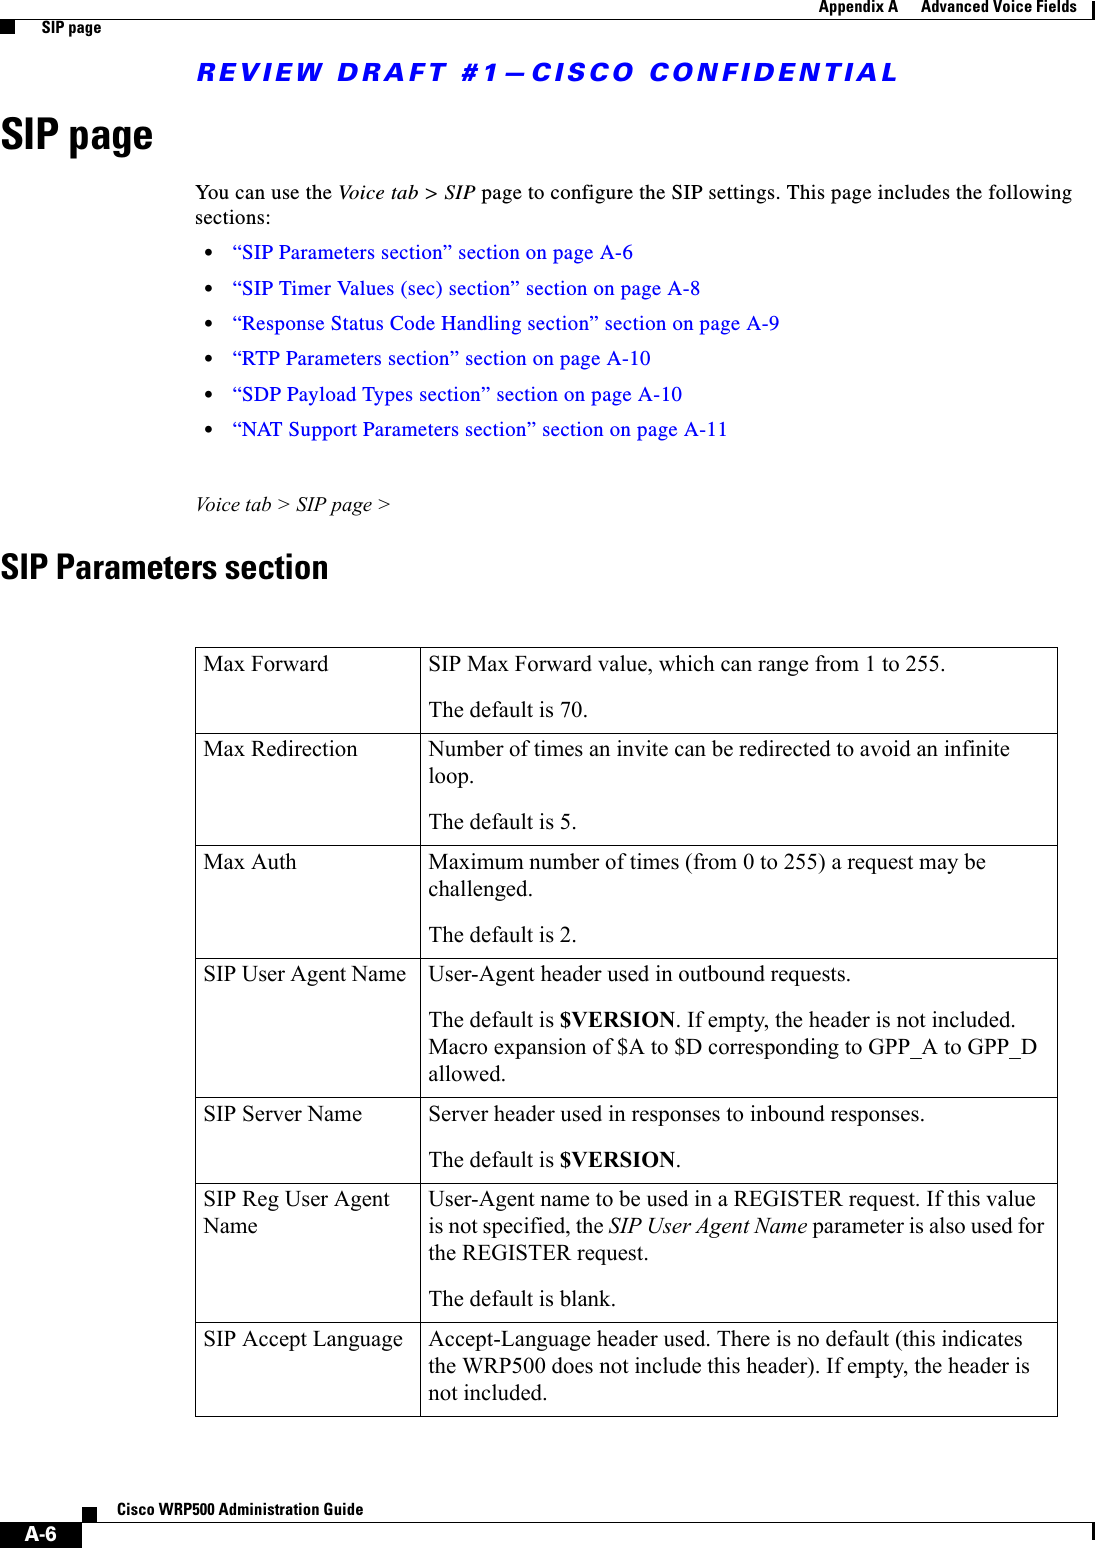 REVIEW DRAFT #1—CISCO CONFIDENTIALA-6Cisco WRP500 Administration Guide Appendix A      Advanced Voice Fields  SIP pageSIP pageYou can use the Vo ice  ta b  &gt;  S I P page to configure the SIP settings. This page includes the following sections:•“SIP Parameters section” section on page A-6•“SIP Timer Values (sec) section” section on page A-8•“Response Status Code Handling section” section on page A-9 •“RTP Parameters section” section on page A-10 •“SDP Payload Types section” section on page A-10 •“NAT Support Parameters section” section on page A-11Voice tab &gt; SIP page &gt;SIP Parameters sectionMax Forward SIP Max Forward value, which can range from 1 to 255. The default is 70.Max Redirection  Number of times an invite can be redirected to avoid an infinite loop. The default is 5.Max Auth  Maximum number of times (from 0 to 255) a request may be challenged. The default is 2.SIP User Agent Name  User-Agent header used in outbound requests.The default is $VERSION. If empty, the header is not included. Macro expansion of $A to $D corresponding to GPP_A to GPP_D allowed.SIP Server Name  Server header used in responses to inbound responses. The default is $VERSION.SIP Reg User Agent Name User-Agent name to be used in a REGISTER request. If this value is not specified, the SIP User Agent Name parameter is also used for the REGISTER request. The default is blank. SIP Accept Language  Accept-Language header used. There is no default (this indicates the WRP500 does not include this header). If empty, the header is not included.